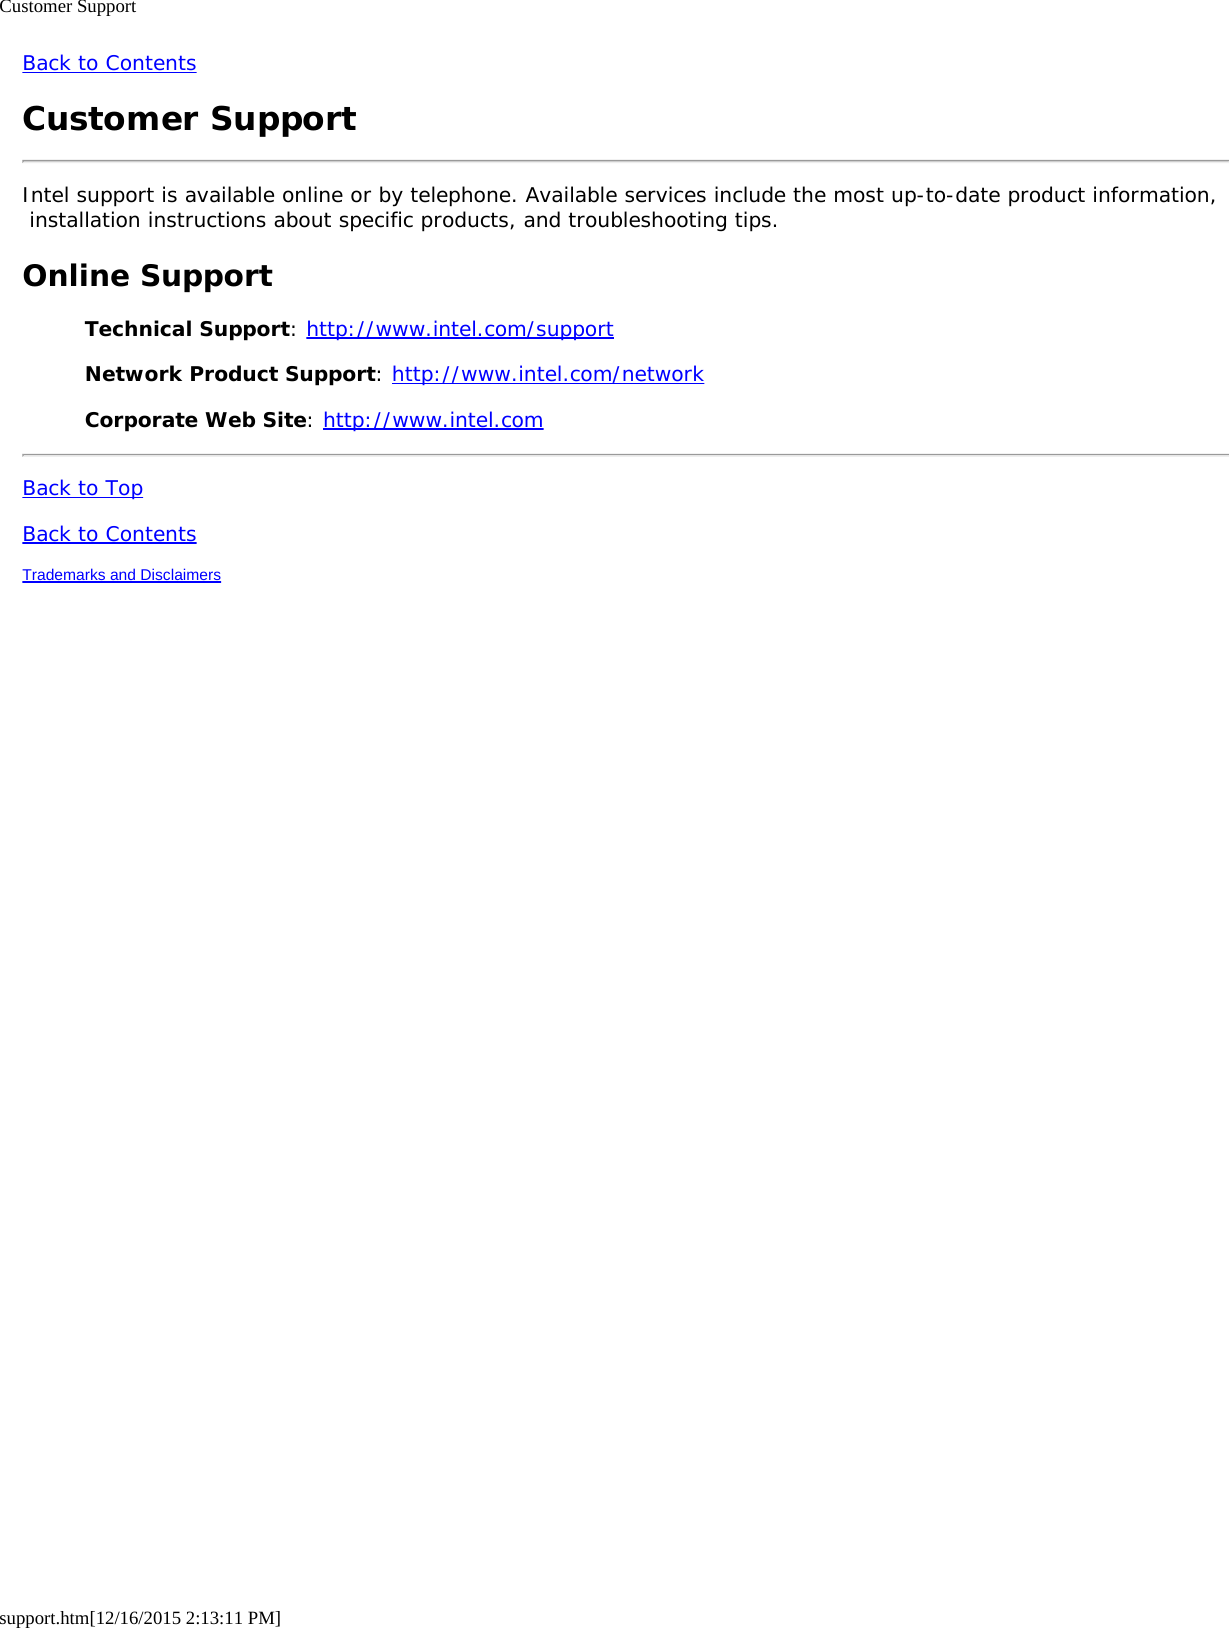 Customer Supportsupport.htm[12/16/2015 2:13:11 PM]Back to ContentsCustomer SupportIntel support is available online or by telephone. Available services include the most up-to-date product information, installation instructions about specific products, and troubleshooting tips.Online SupportTechnical Support: http://www.intel.com/supportNetwork Product Support: http://www.intel.com/networkCorporate Web Site: http://www.intel.comBack to TopBack to ContentsTrademarks and Disclaimers